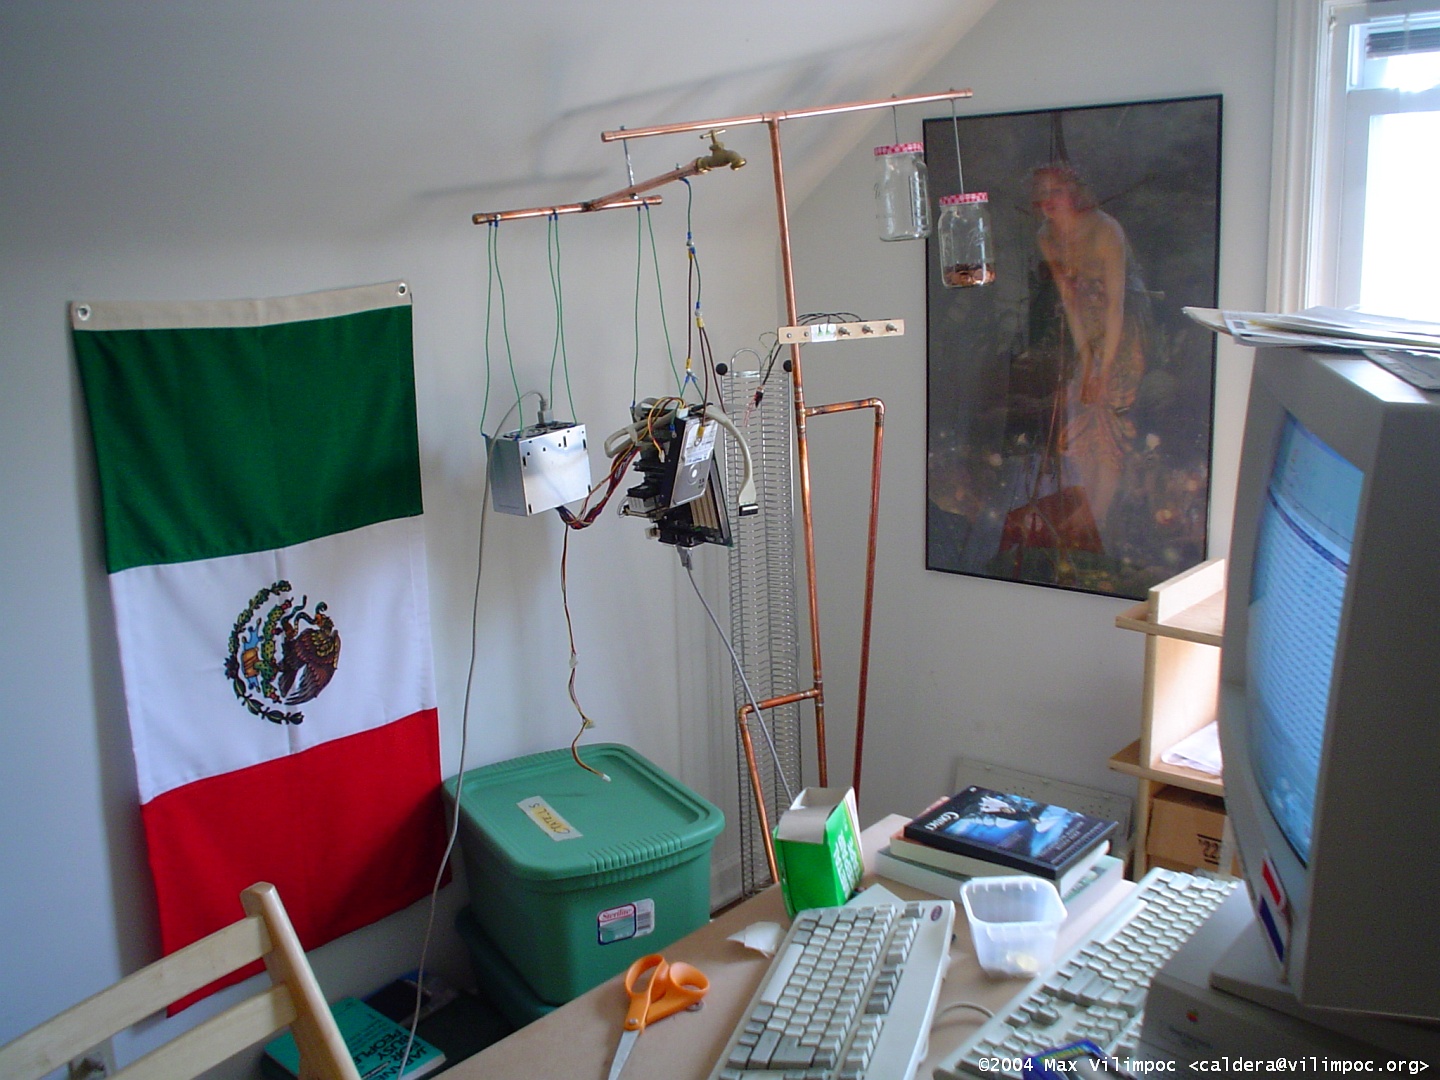 Another view of the fully assembled hanging computer in the attic workroom, with several green storage bins, and a Mexican flag made of cloth